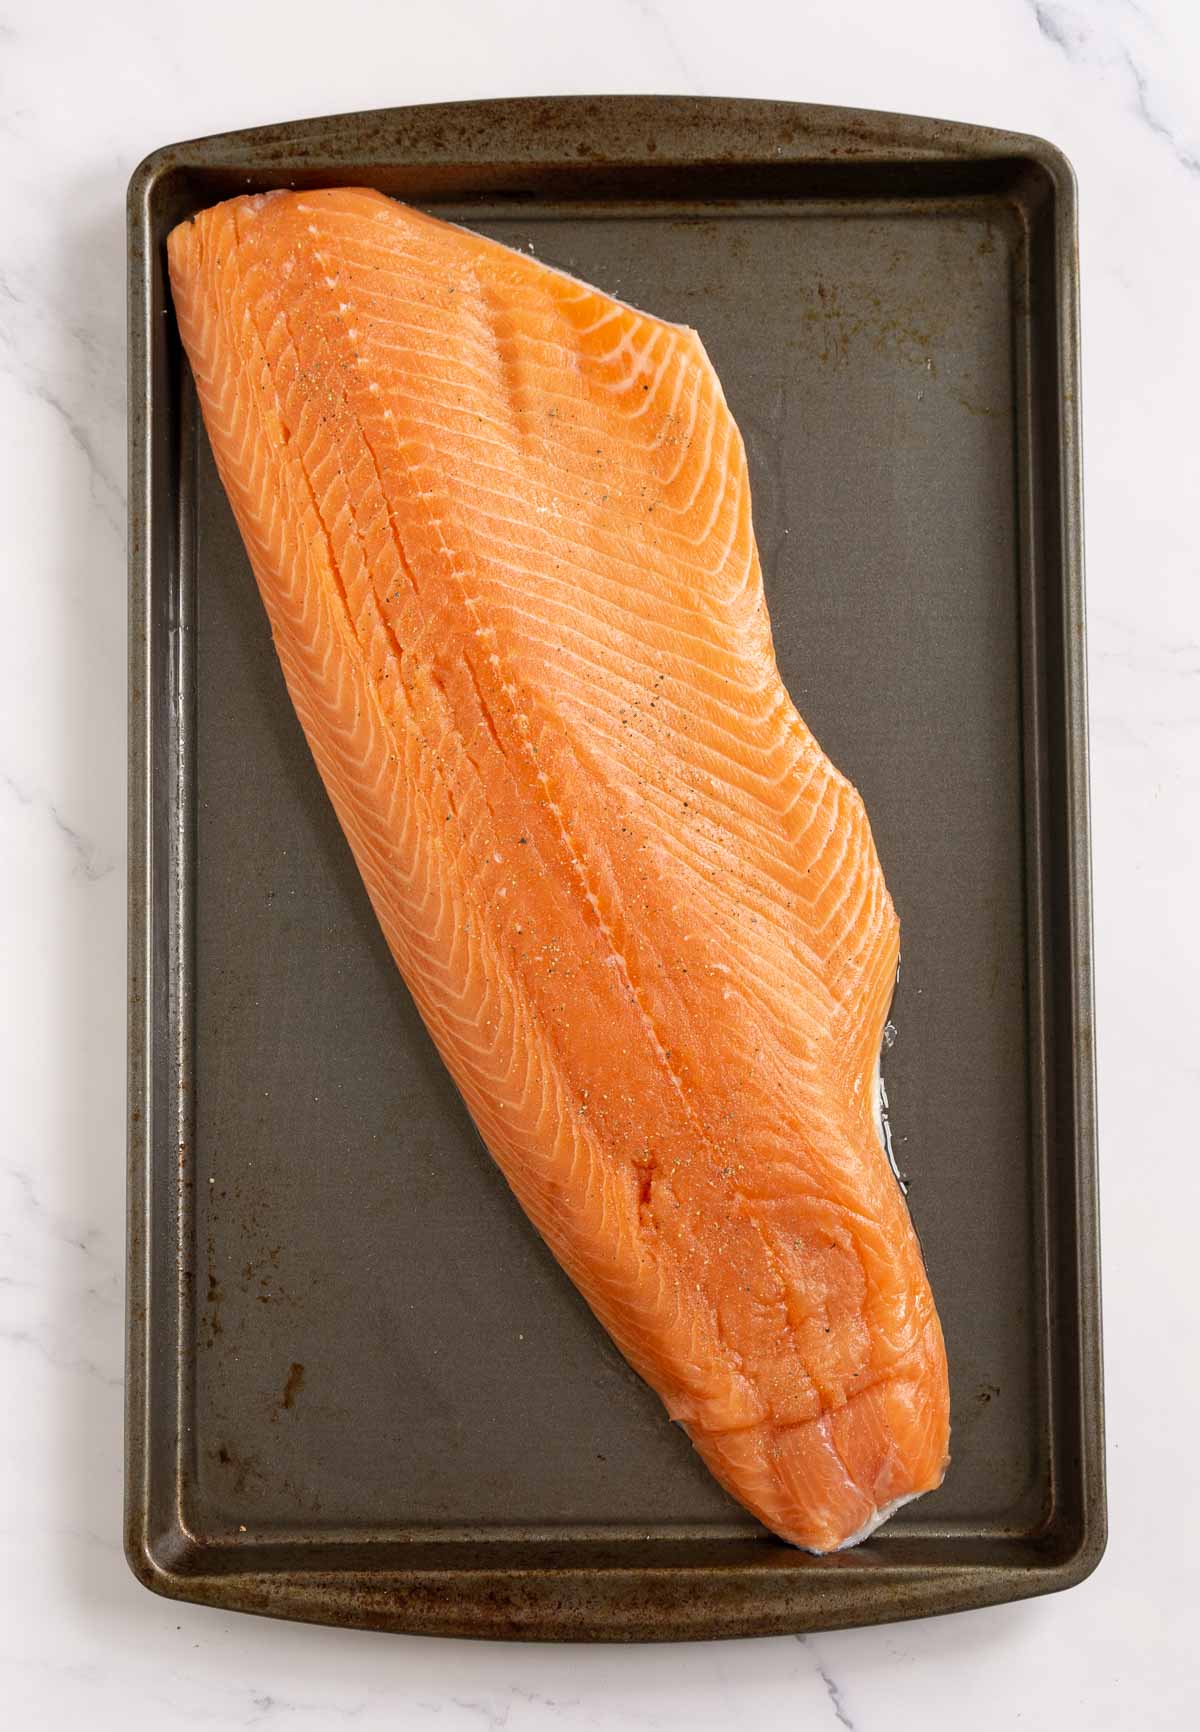 Whole salmon fillet seasoned with salt and pepper